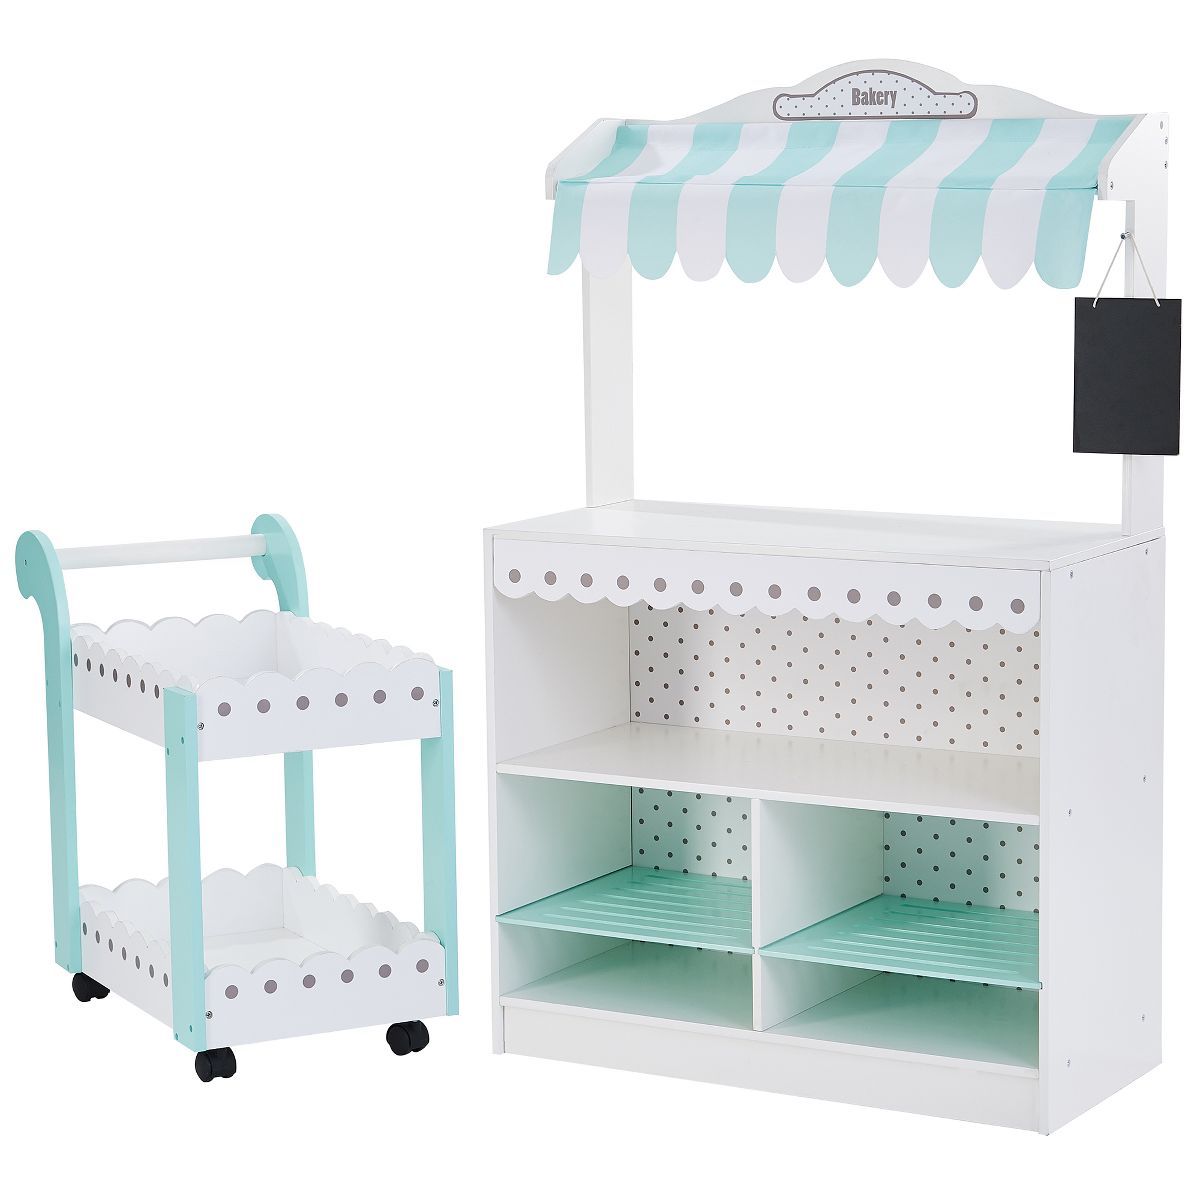 Teamson Kids My Dream Bakery Shop and Pastry Cart Wooden Play Set, White/Mint | Target